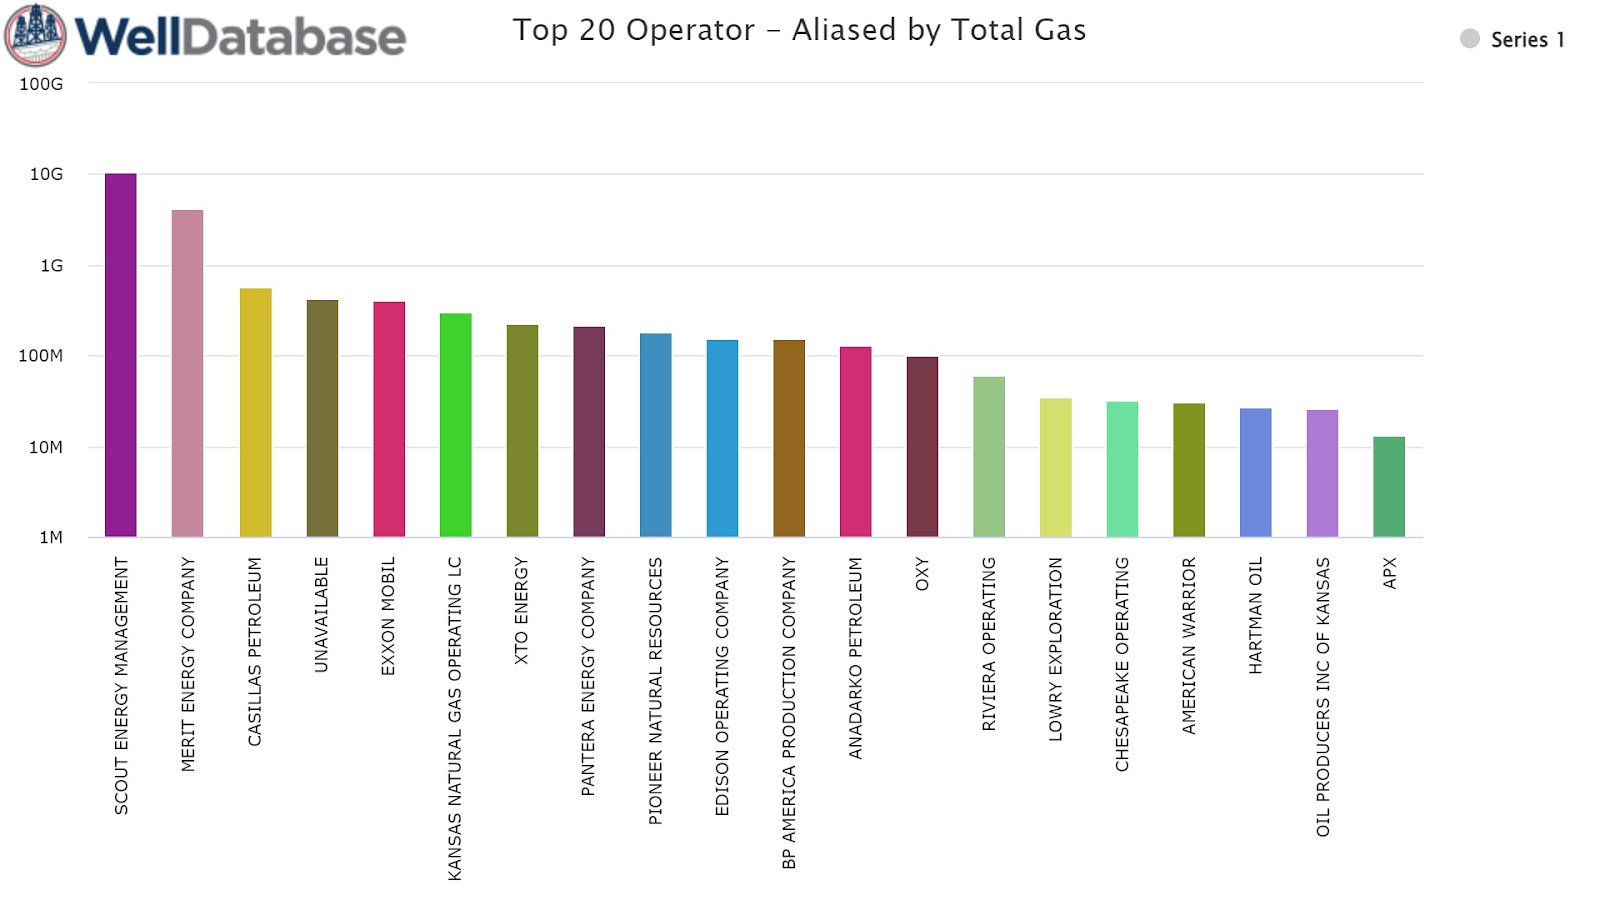 Top 20 Operators by Total Gas Production in Hugoton Gas Field